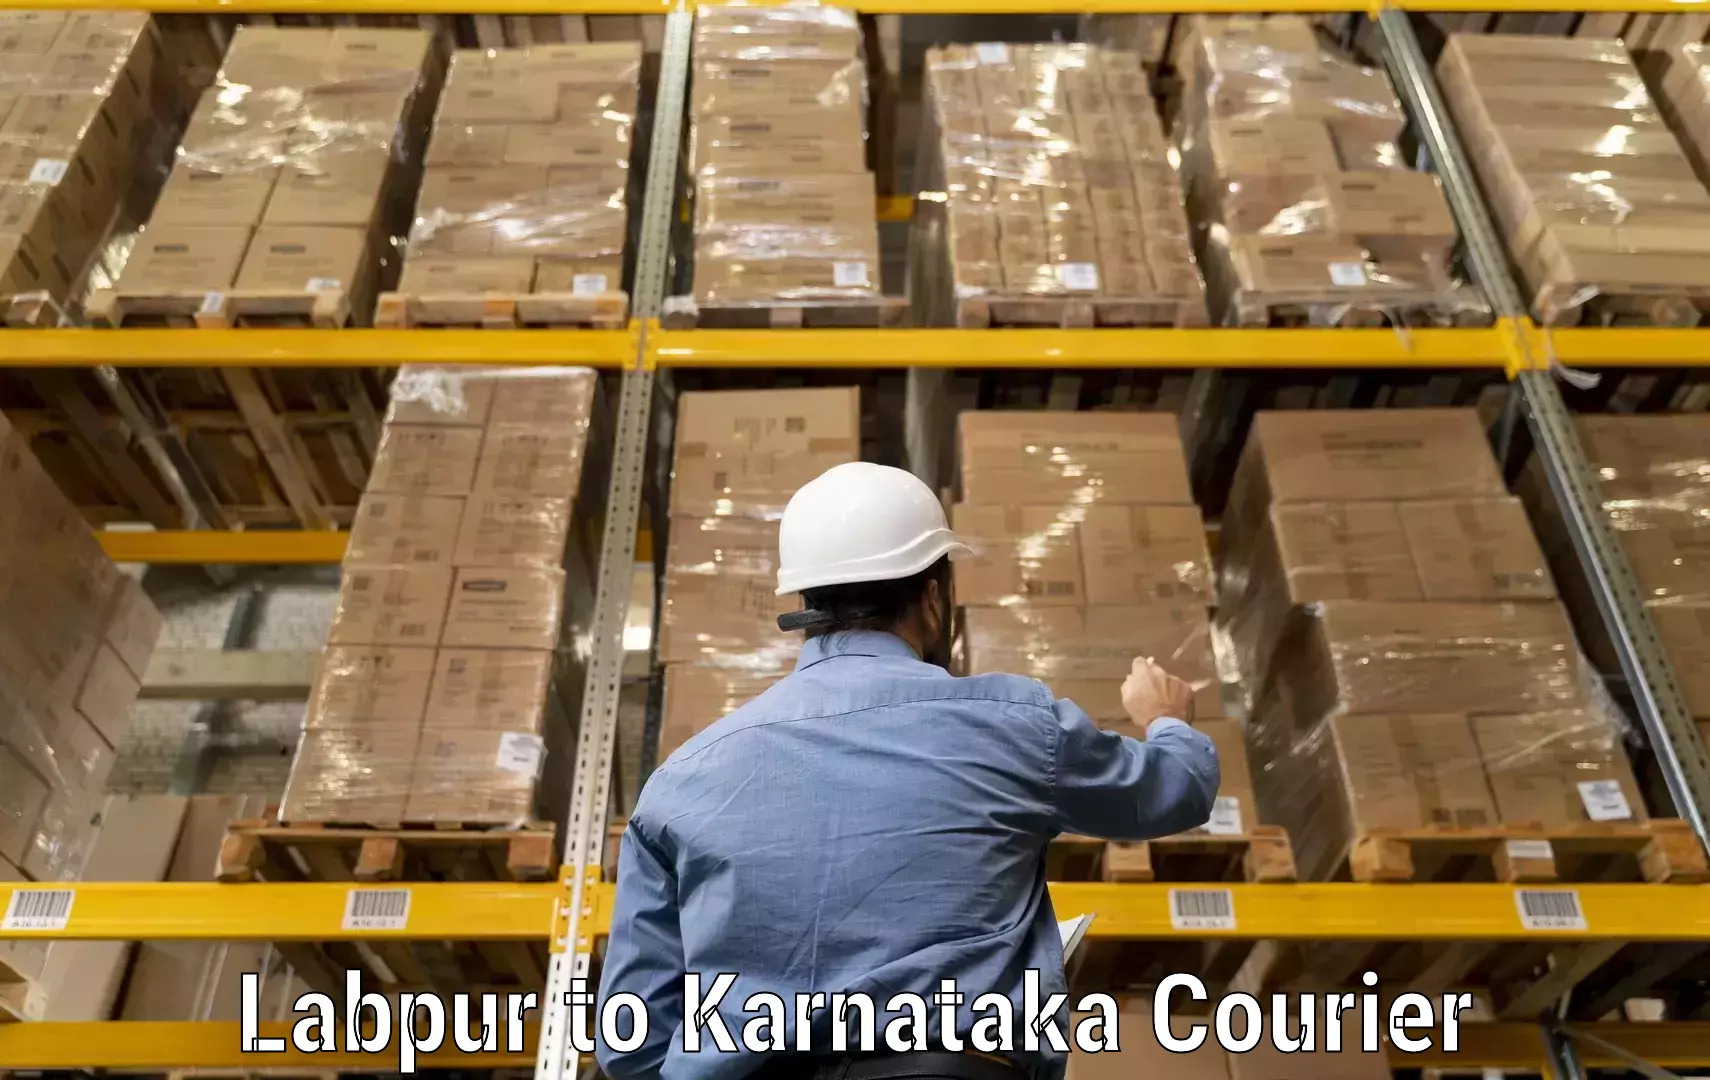 Reliable package handling in Labpur to Deodurga